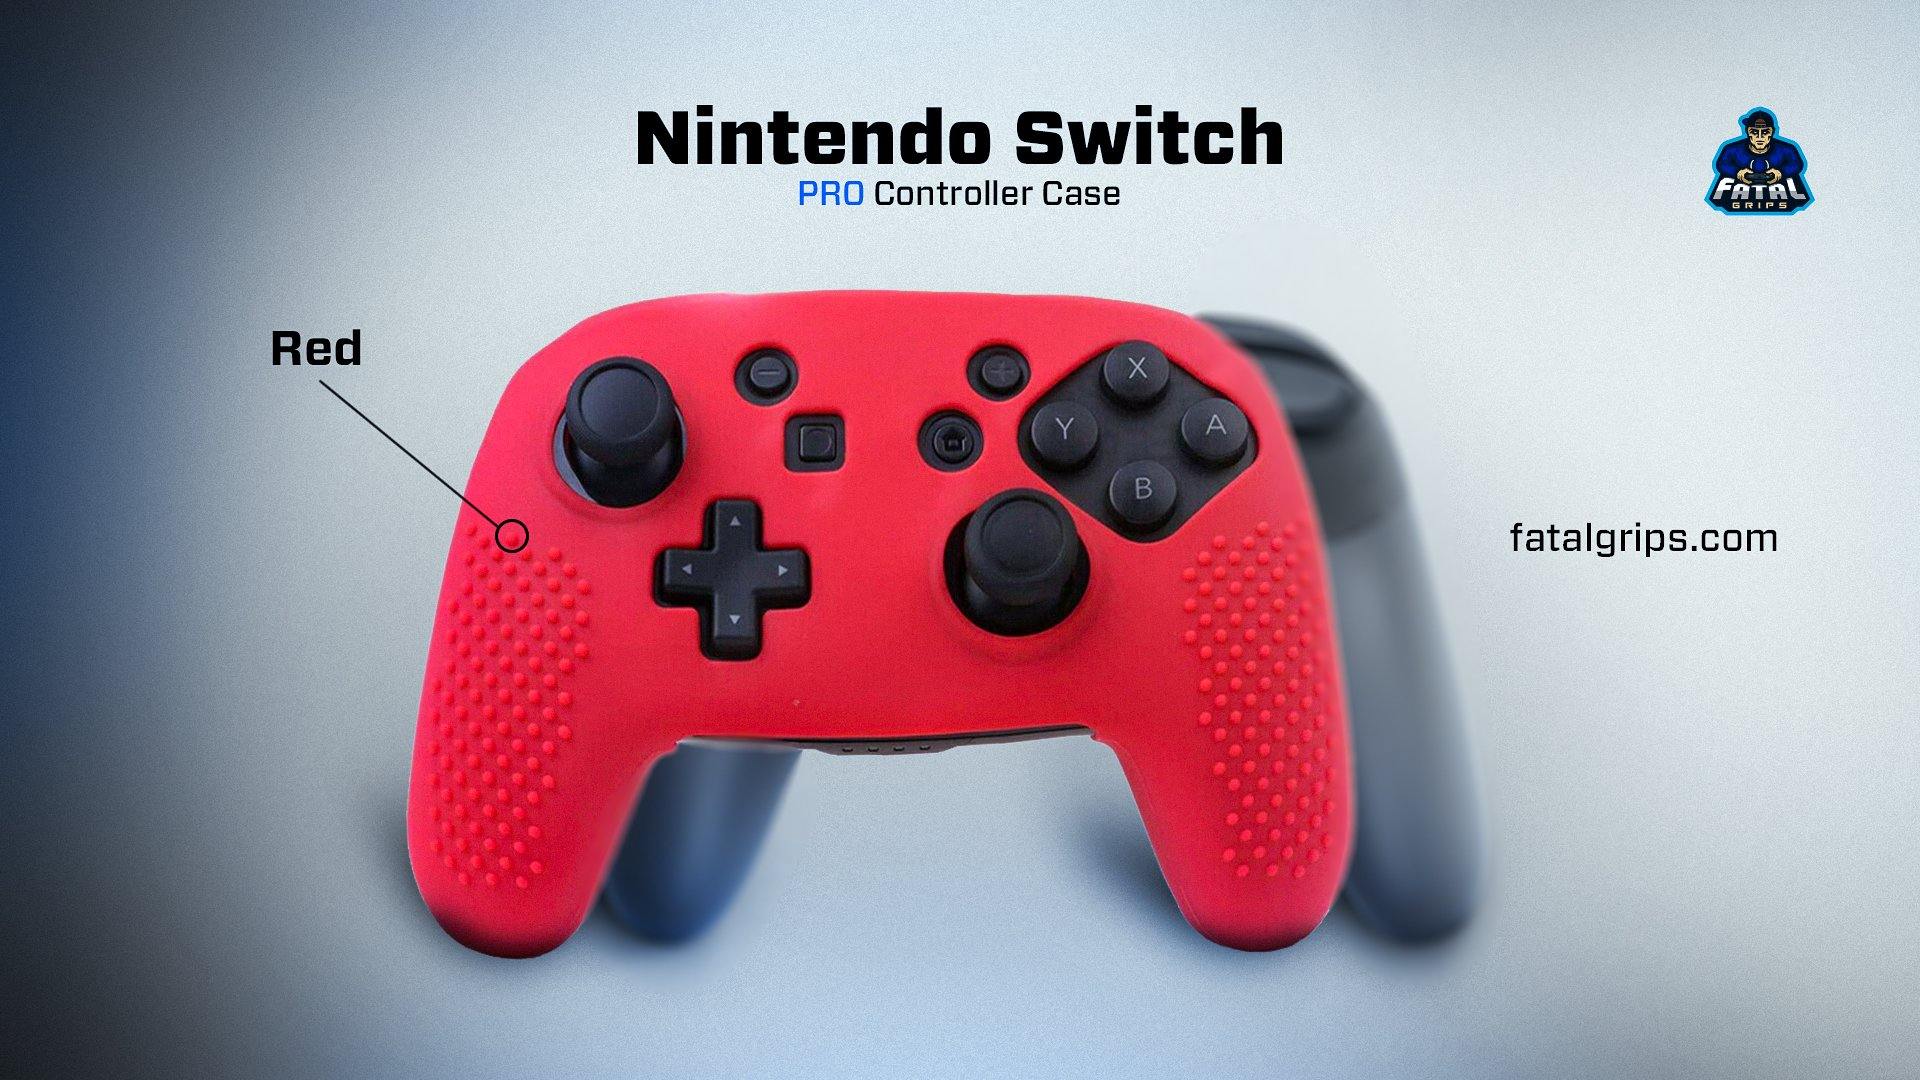 Nintendo Switch Pro Controller Case (Red) - Fatal Grips